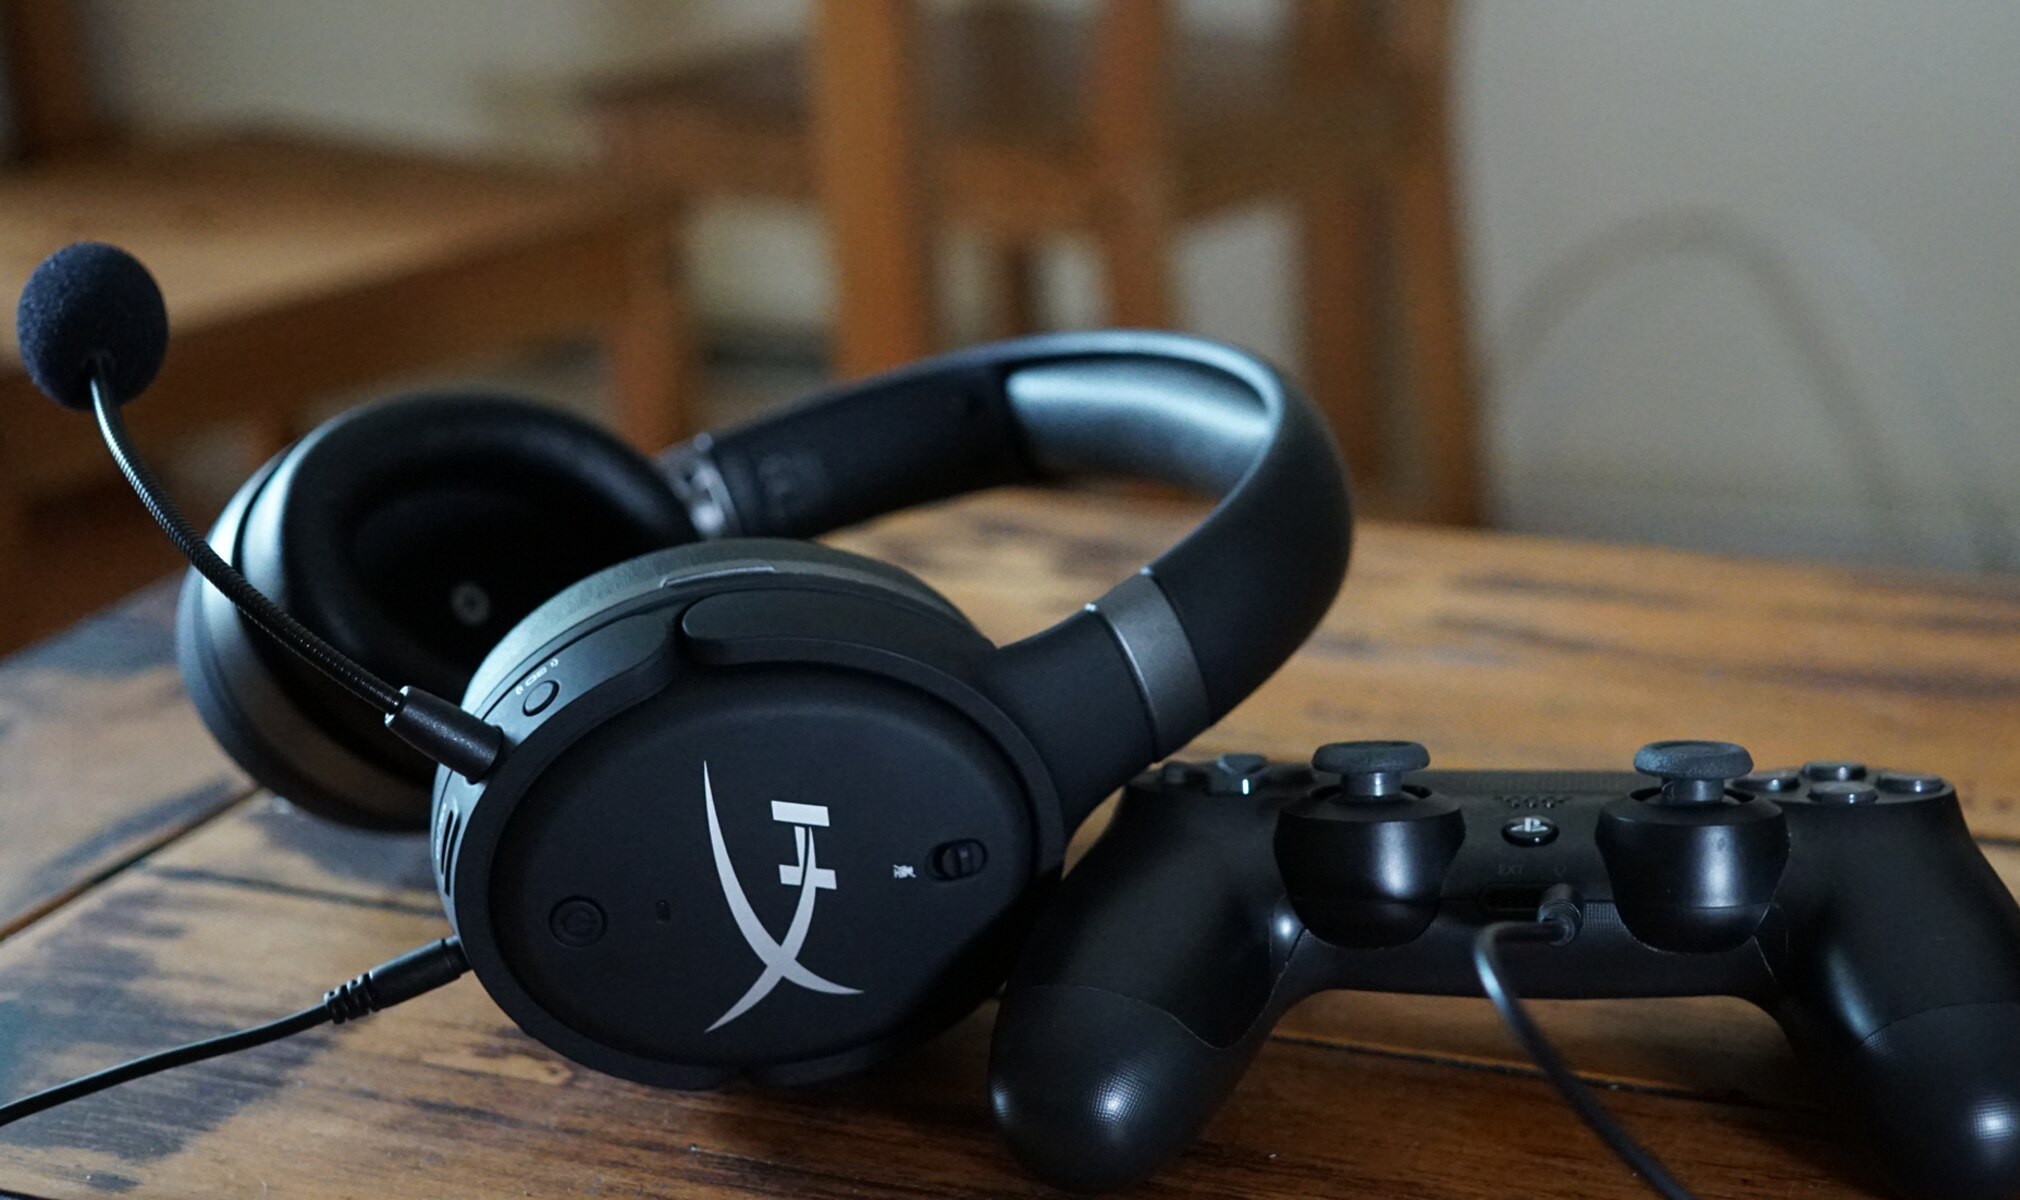 How Is The HuHD 2.4 GHz Wireless Gaming Headset For PS4?